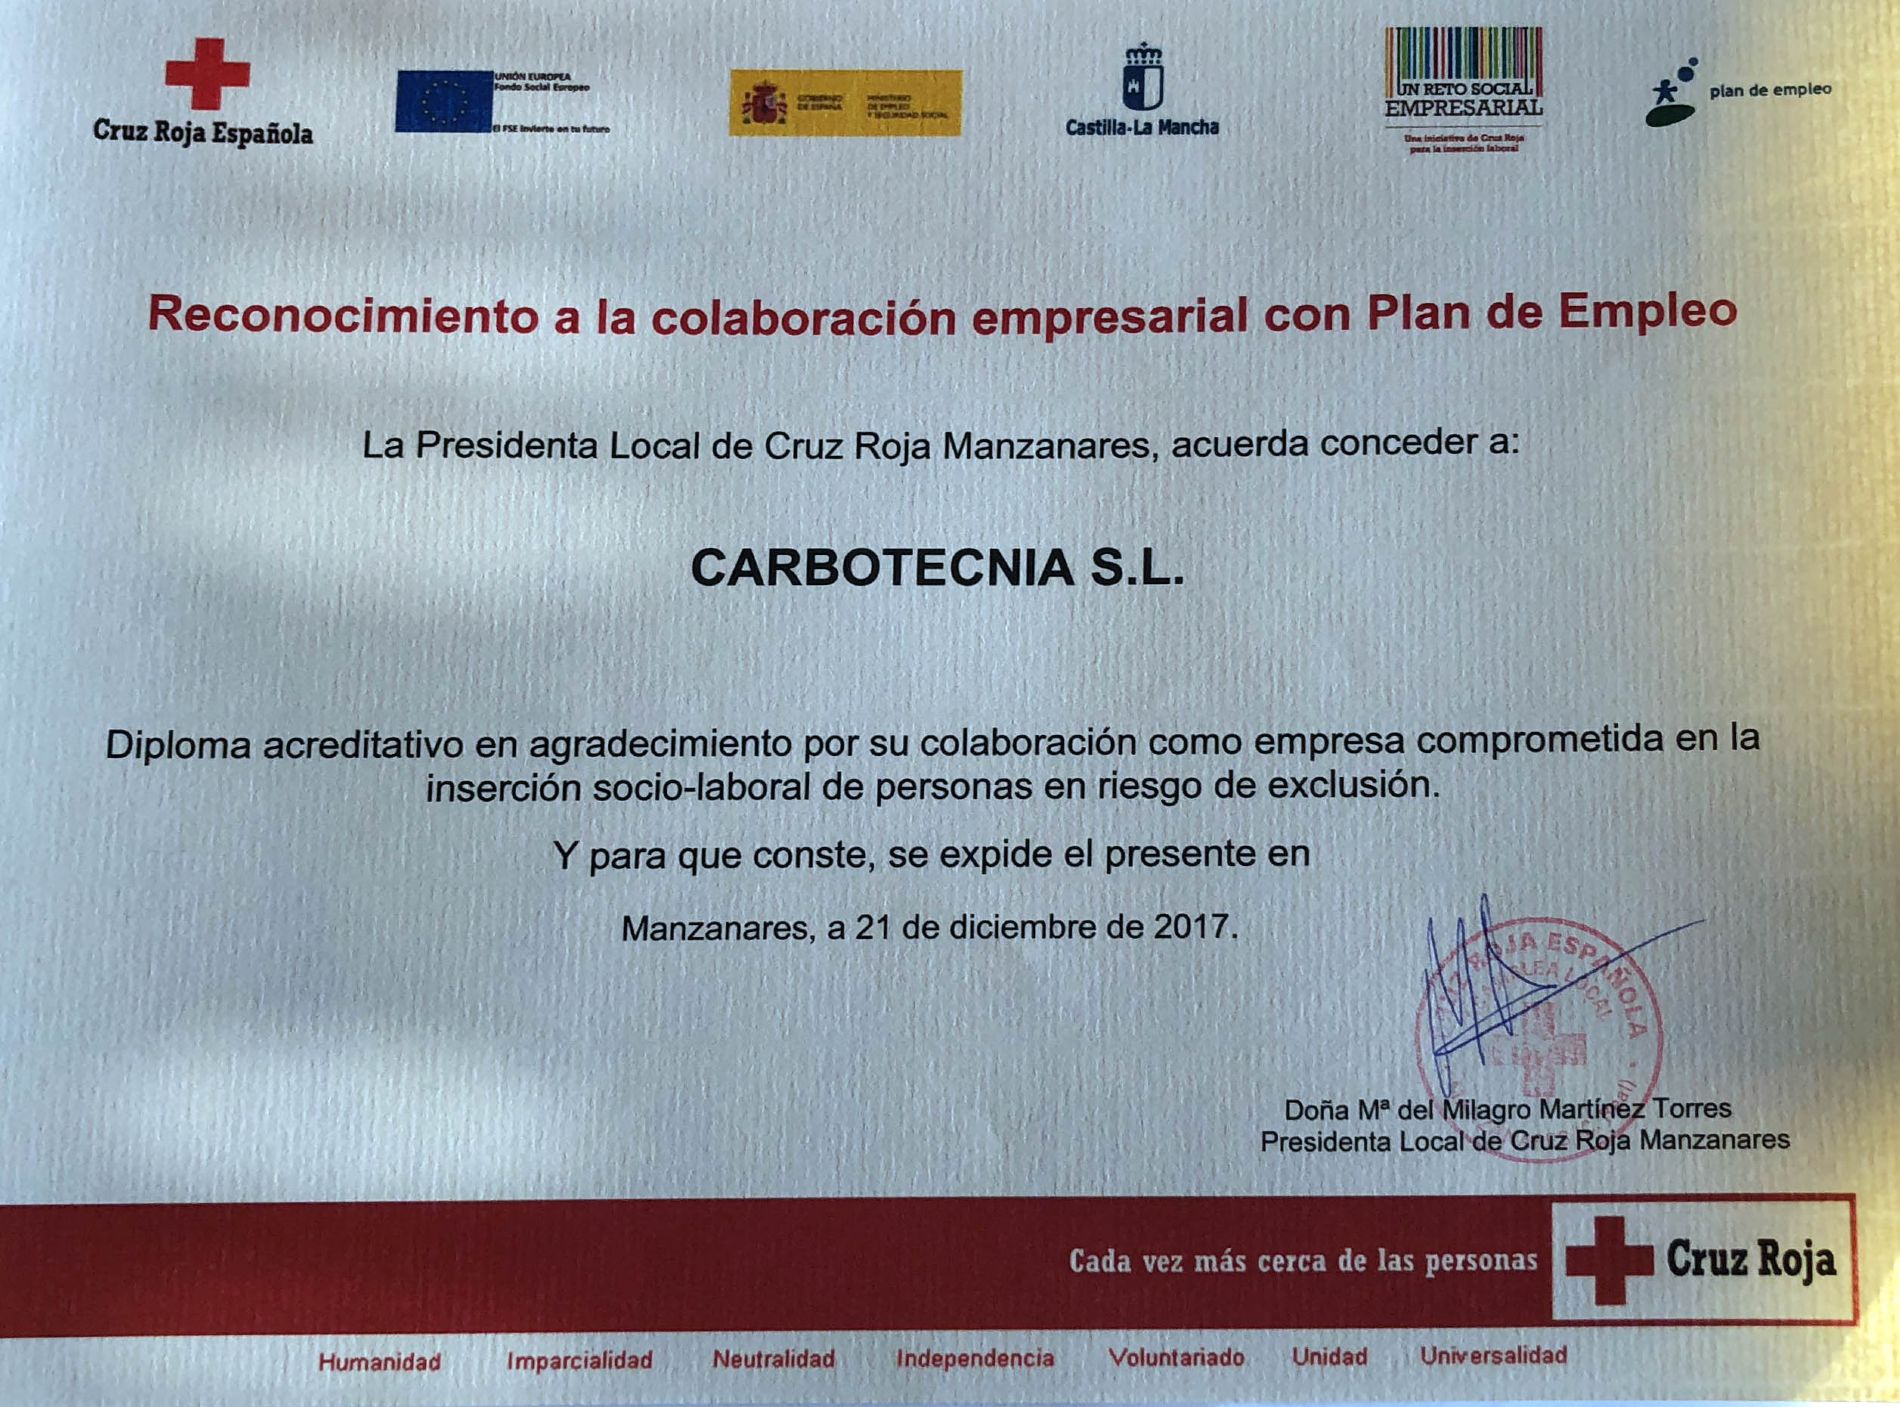 Carbotecnia receives the recognition from Red Cross